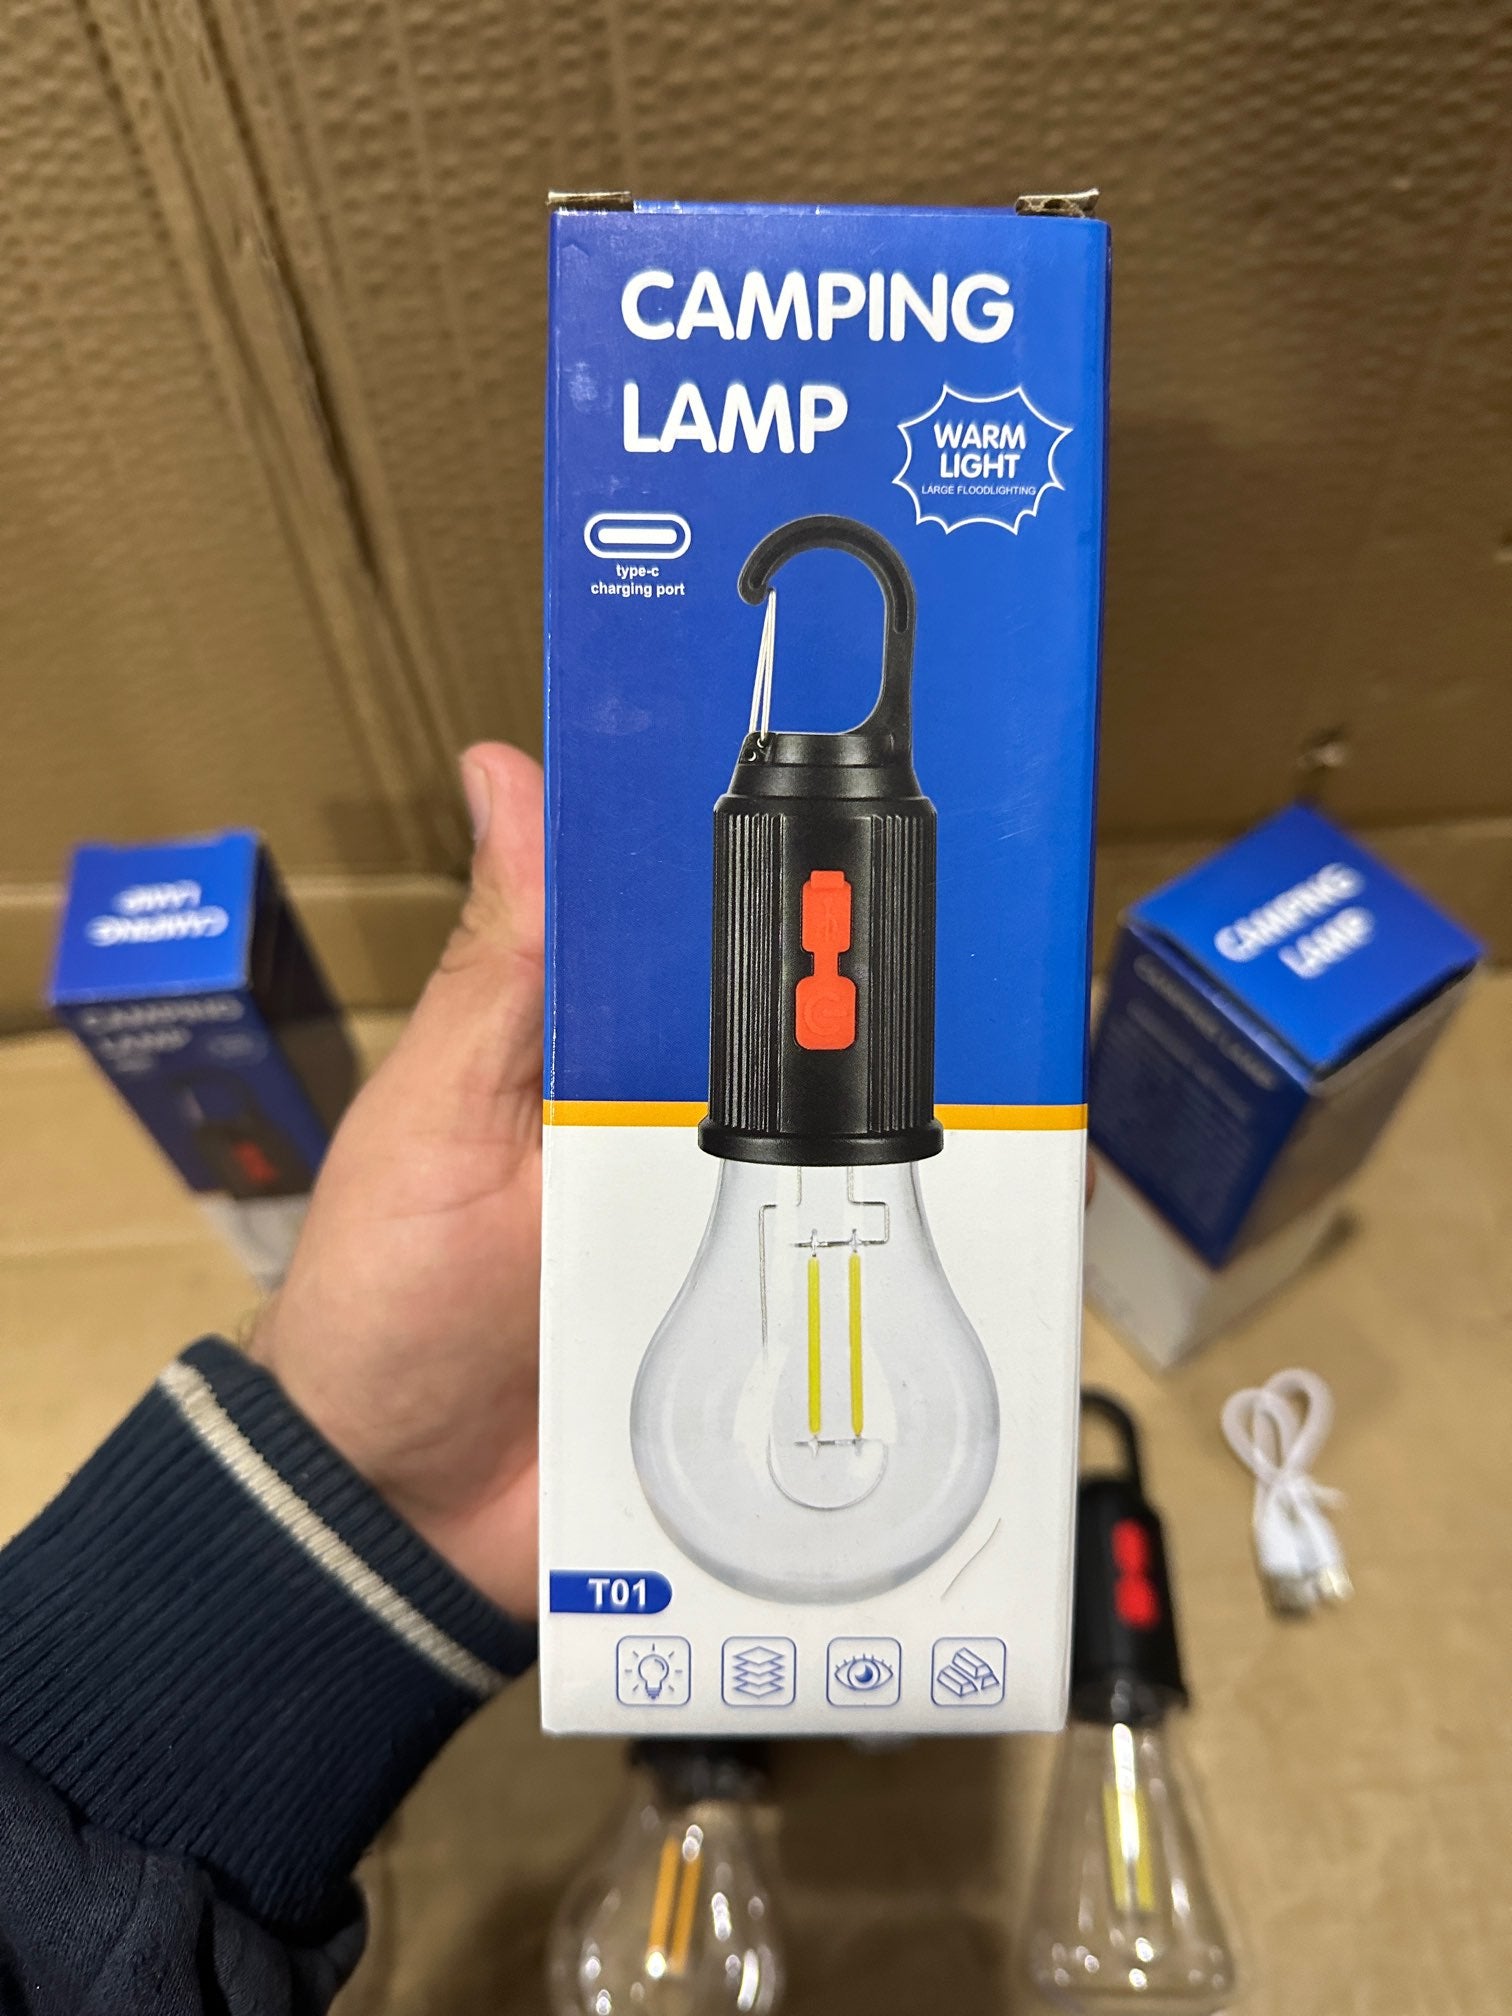 Lot imported 3 types of camping lamp